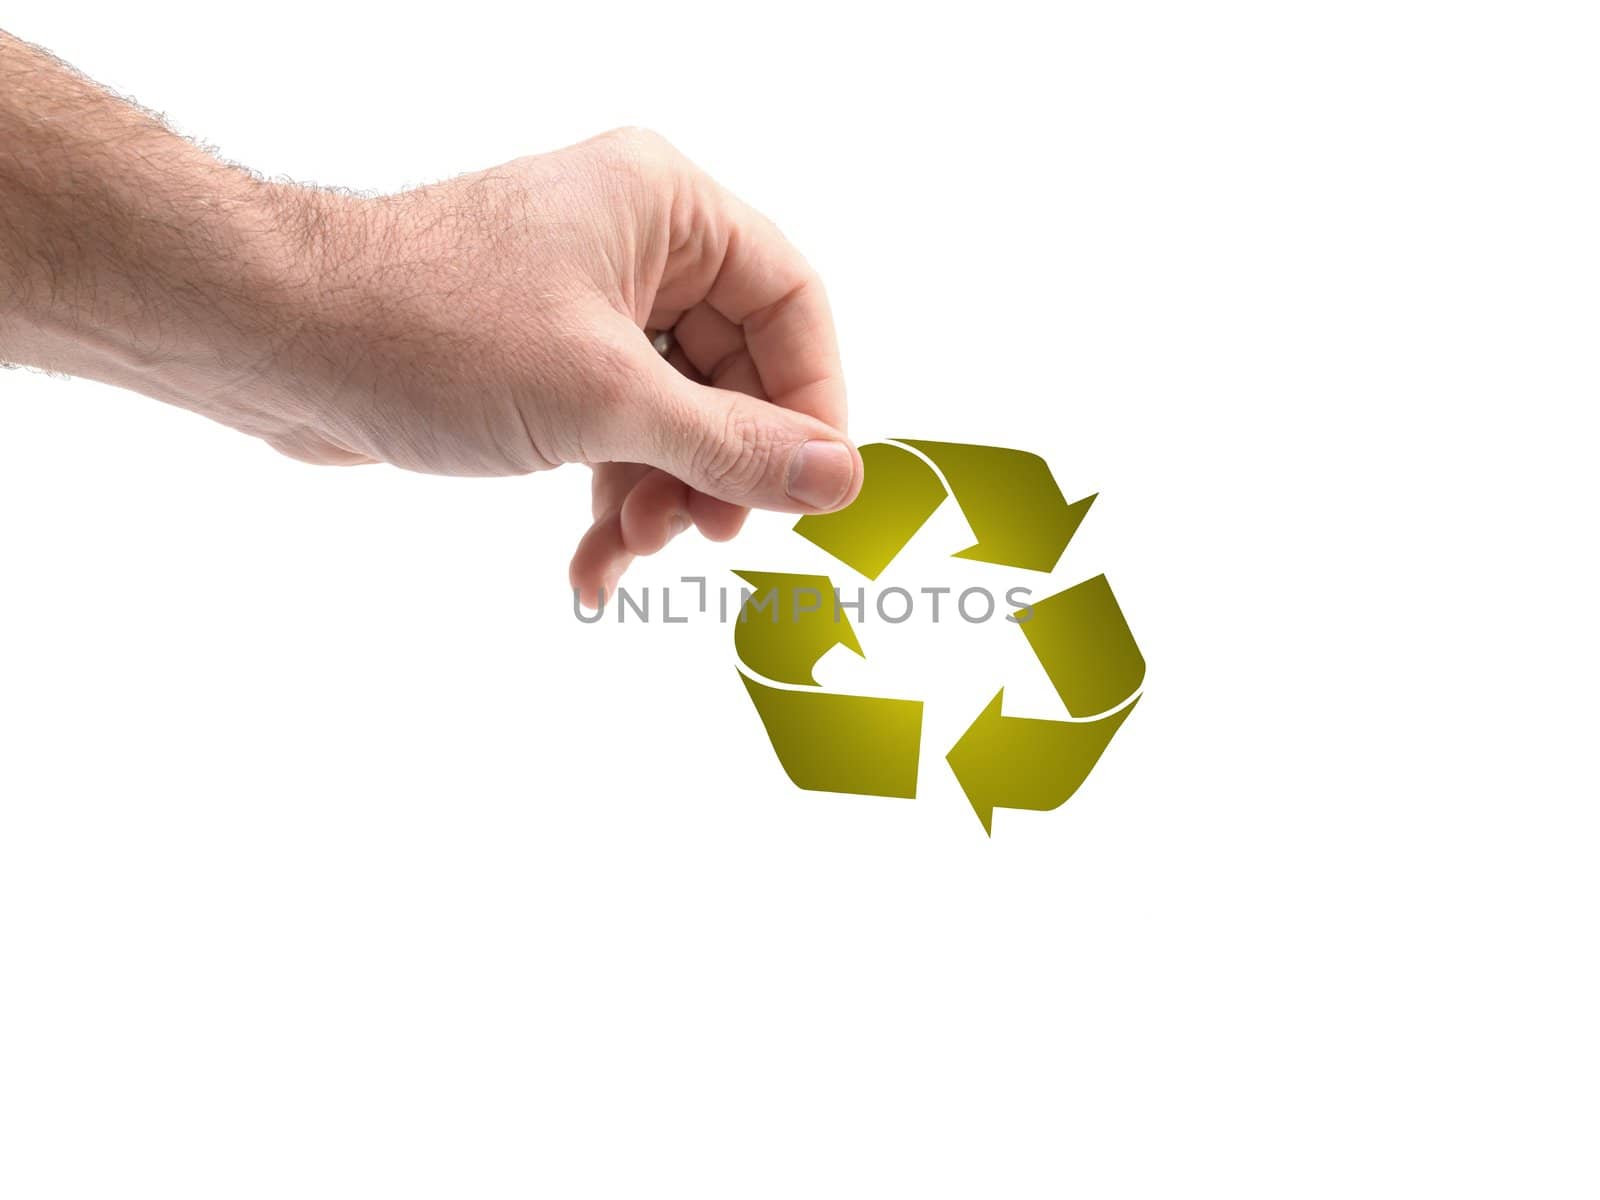 A conceptual recycle image held by a hand